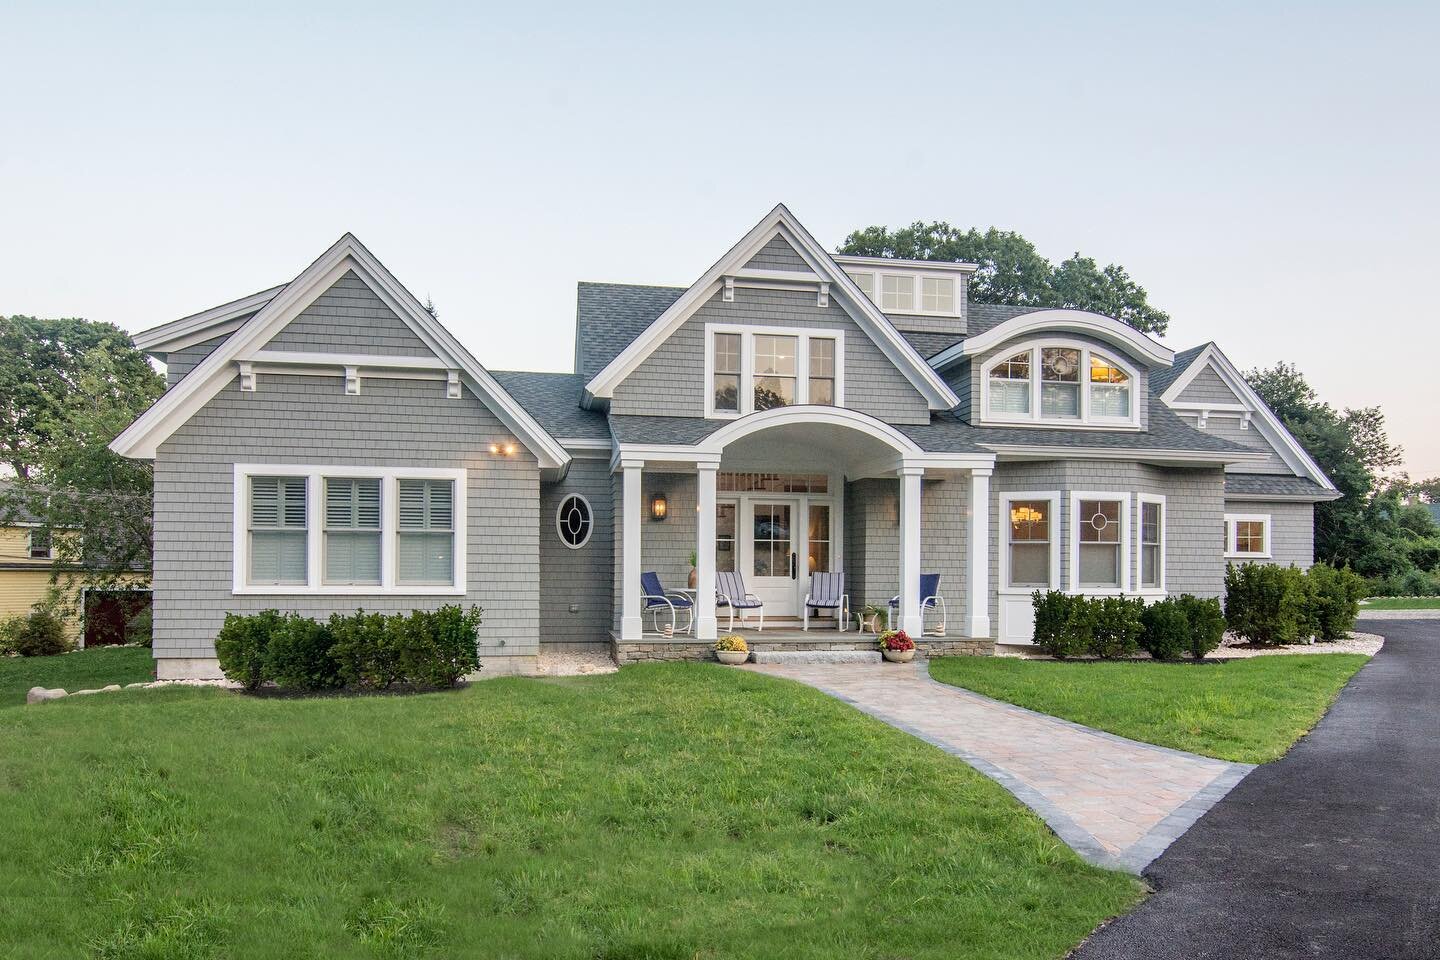 It is atypical for our clients to put their guest experiences ahead of their own in a design. This custom shingle style home utilized every square inch to accommodate public and private spaces for friends and family. An open main living area with lot